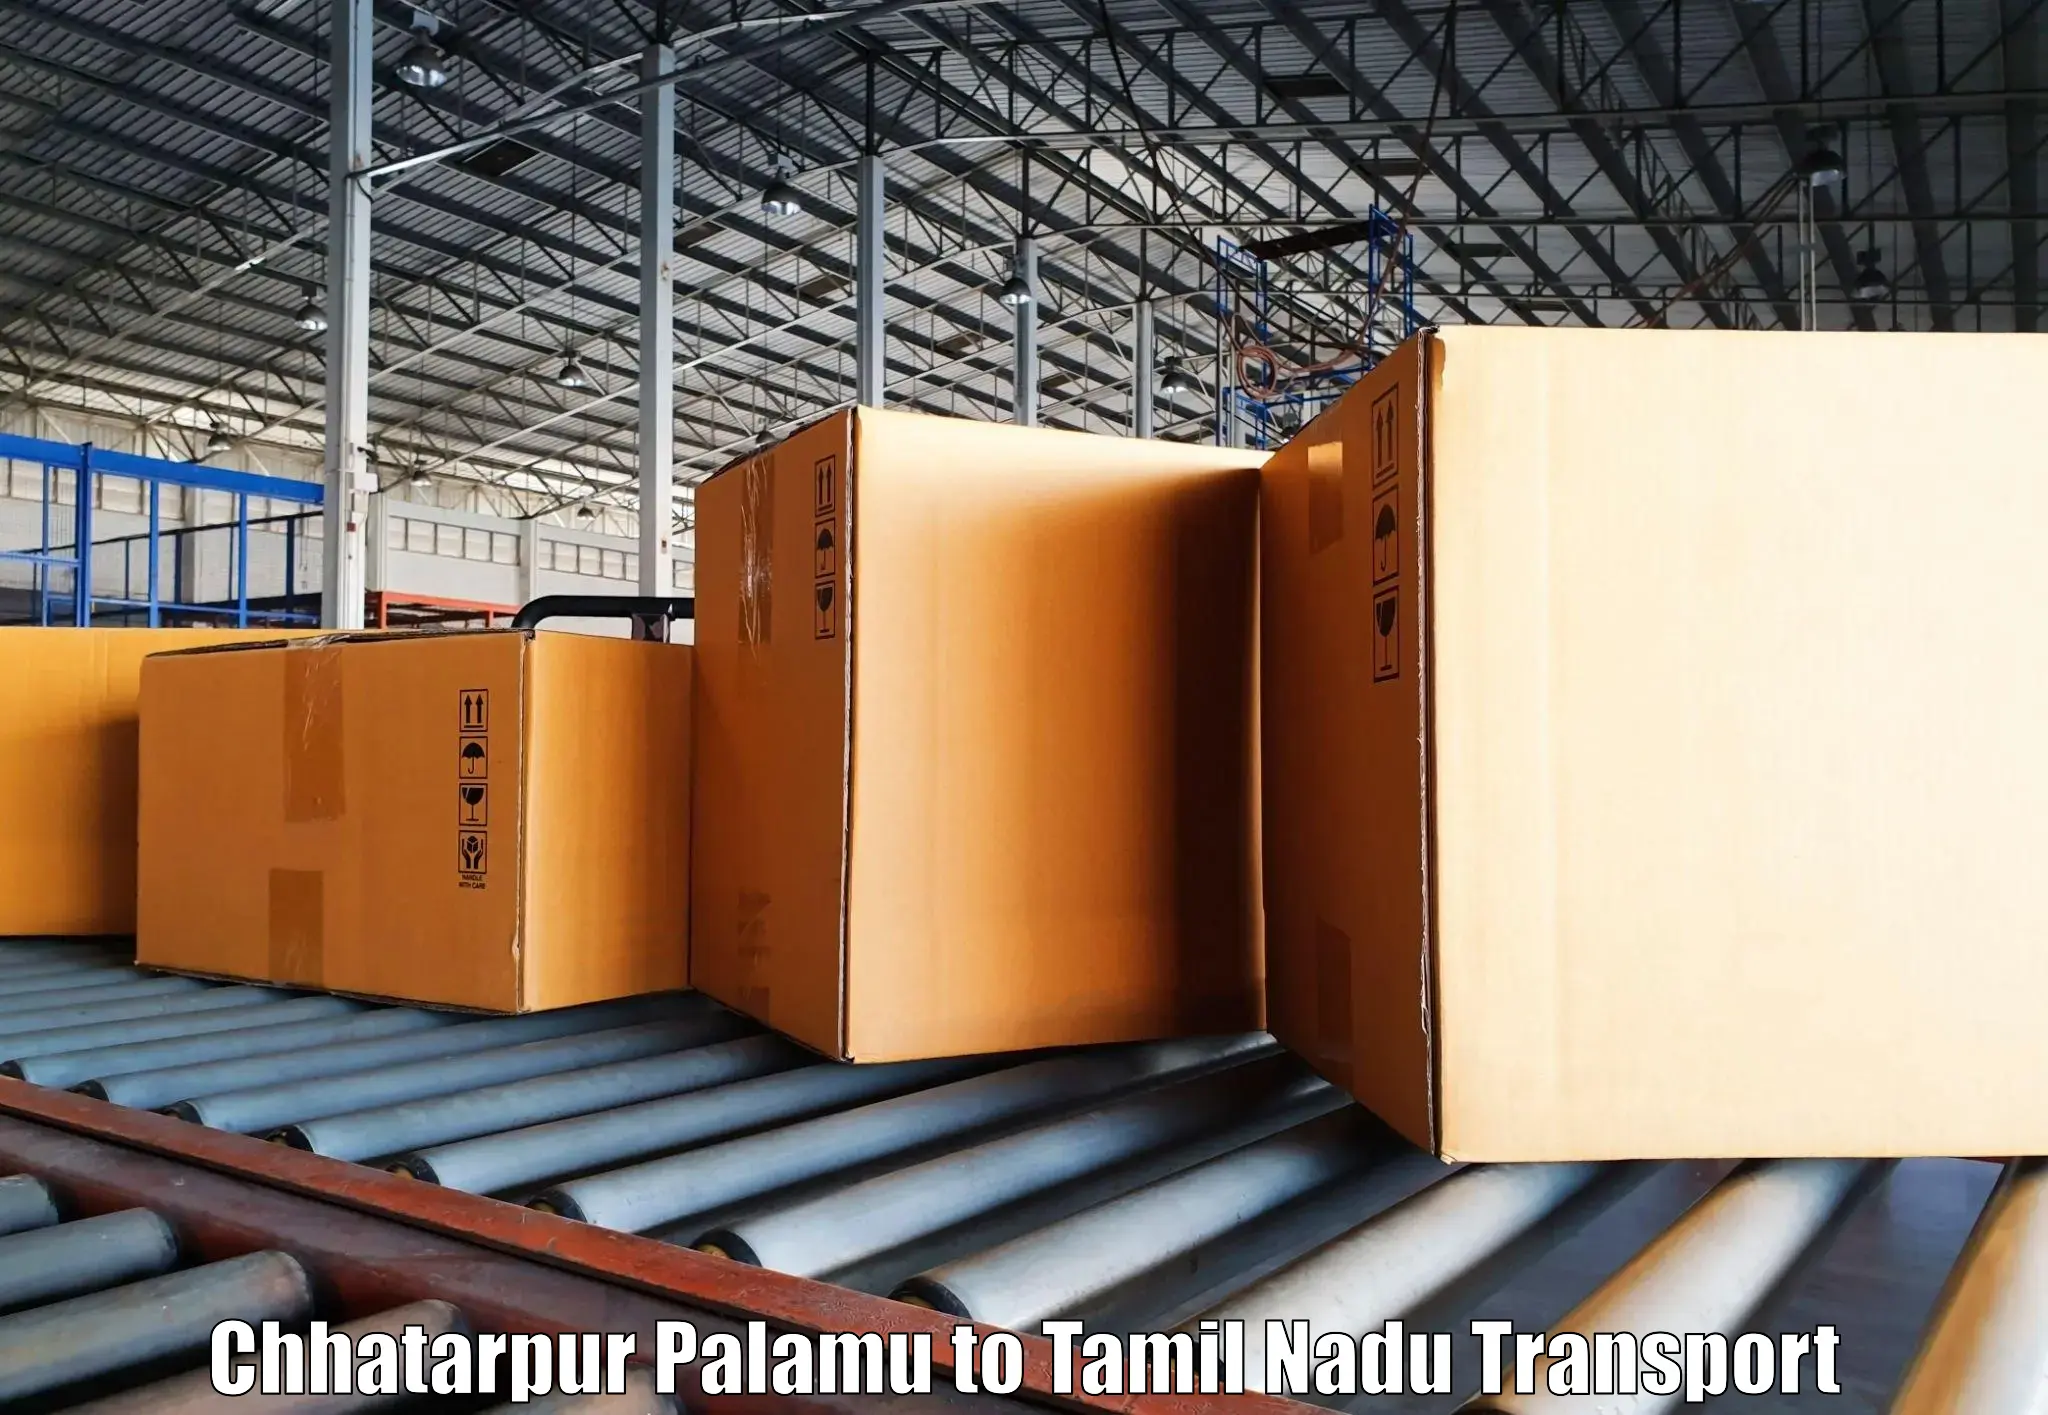 Package delivery services Chhatarpur Palamu to Tamil Nadu